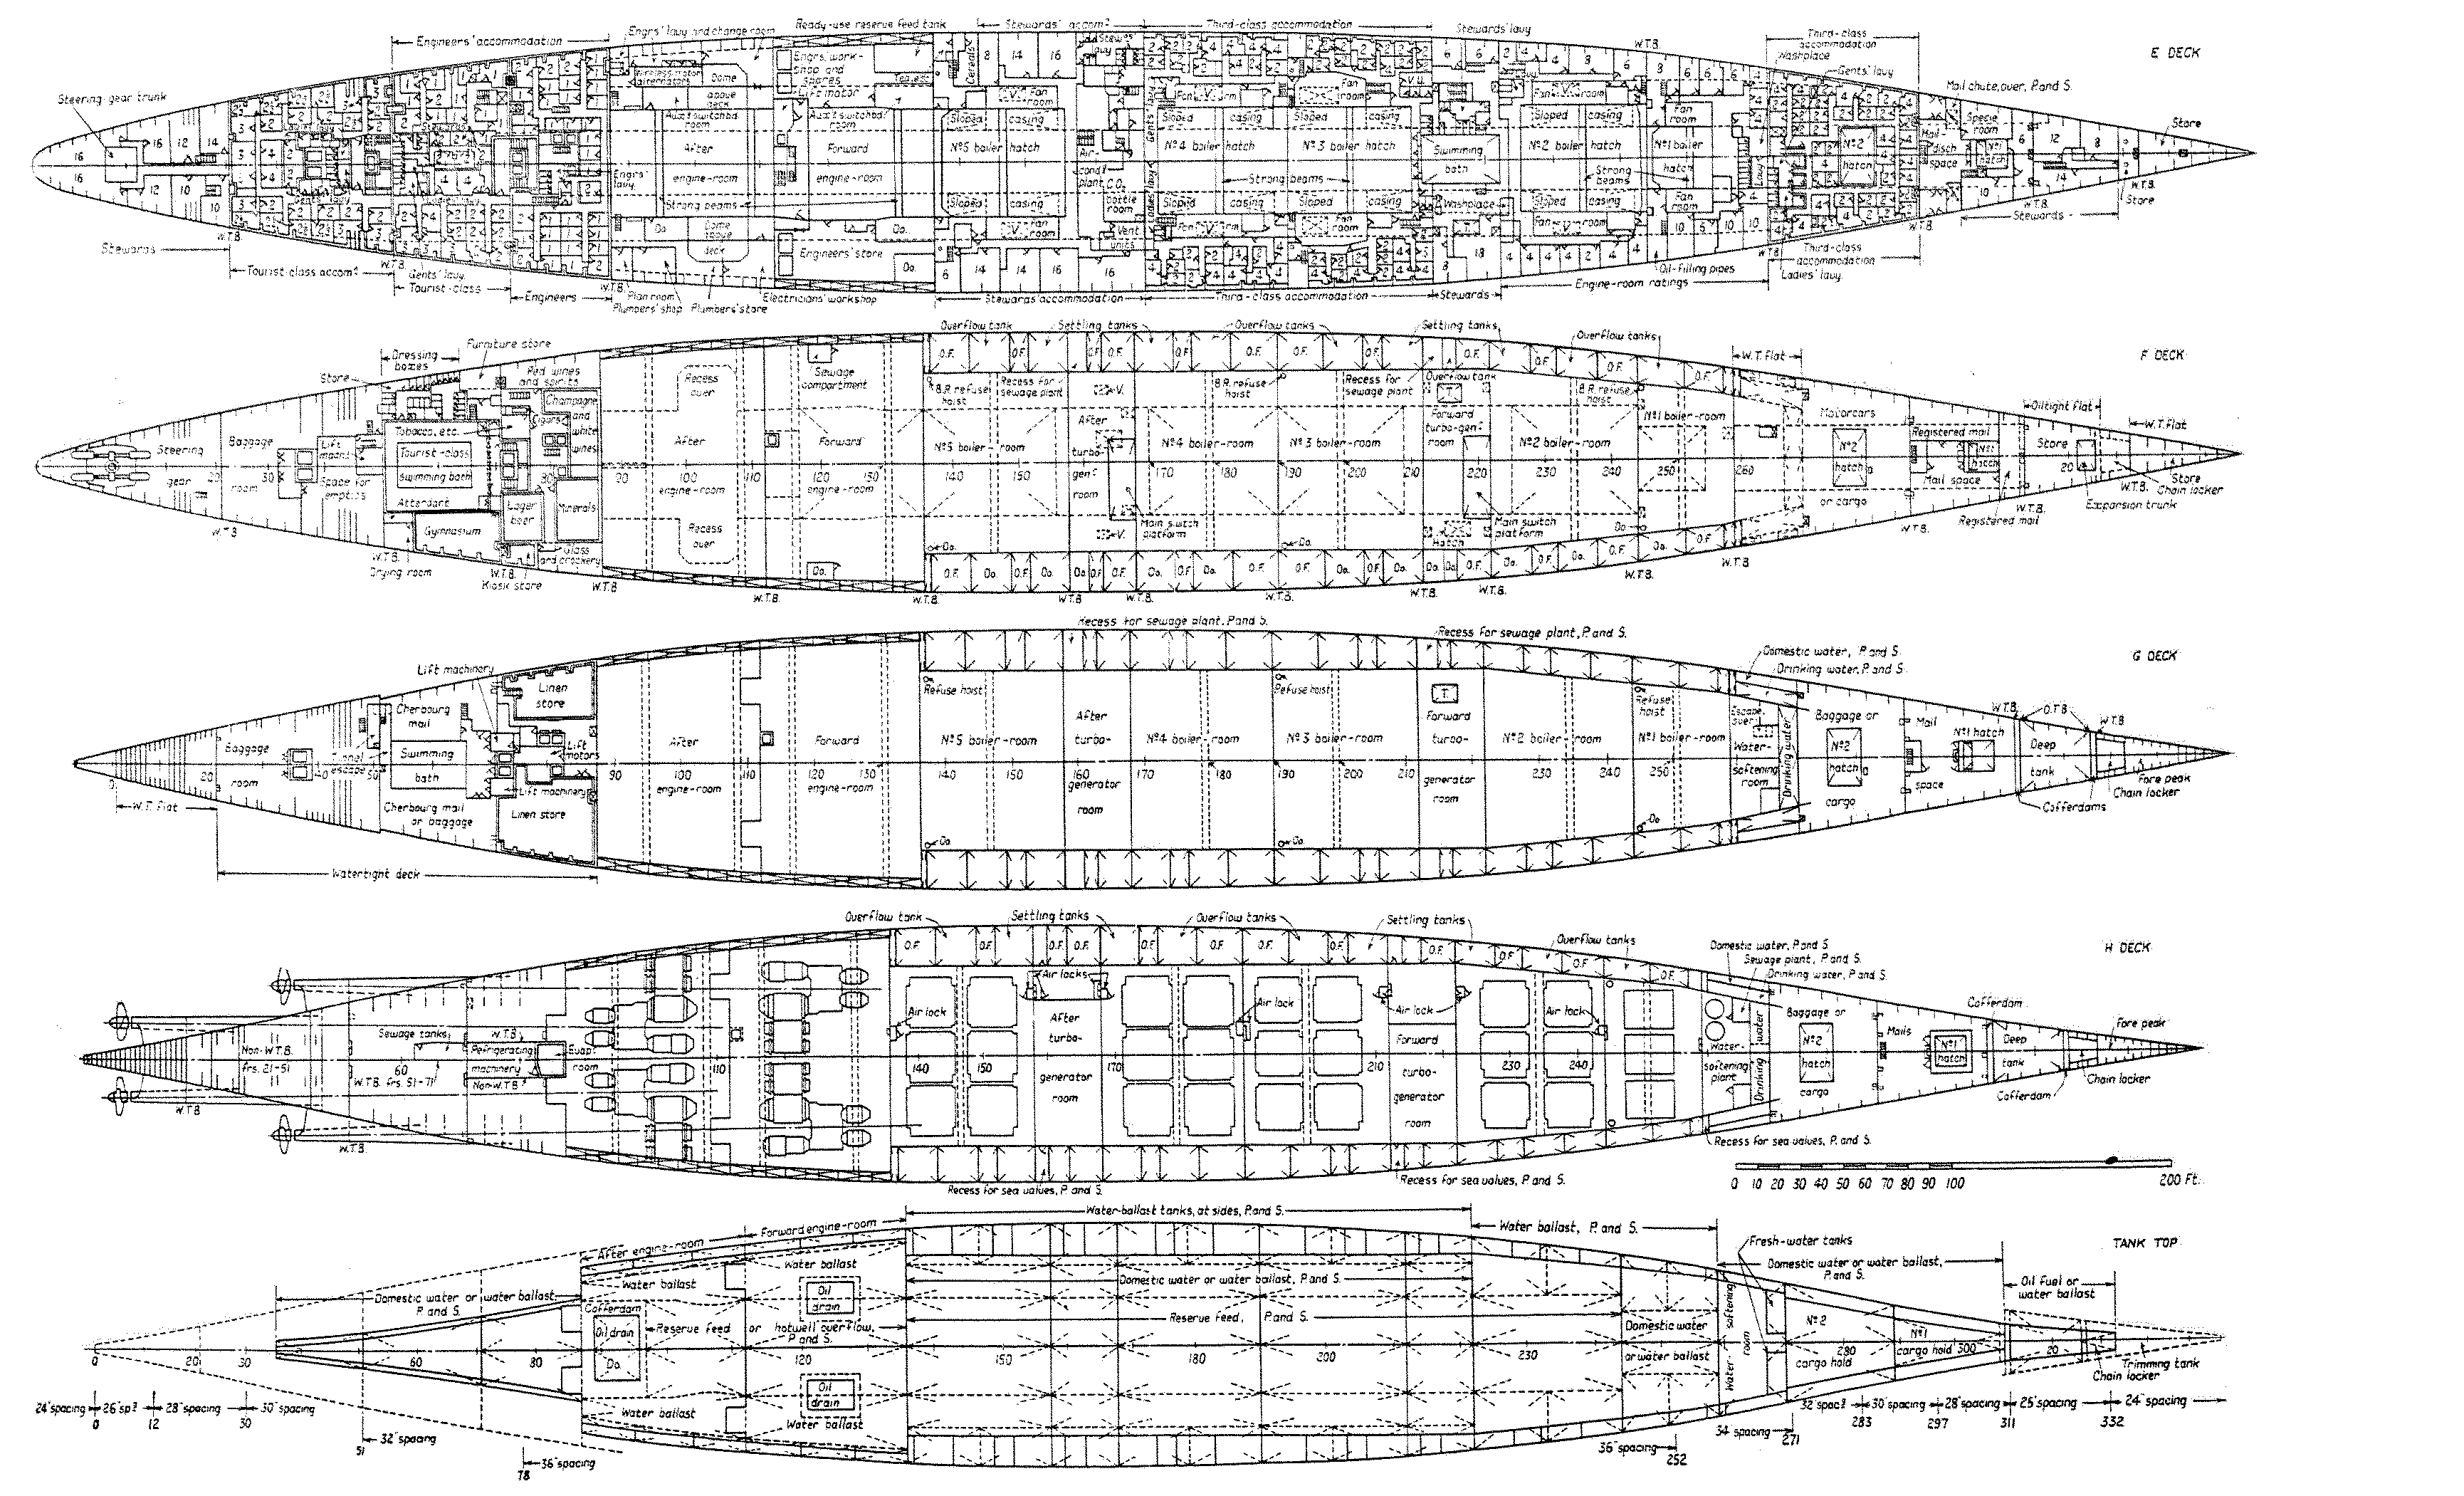 Queen Mary plan 3.gif